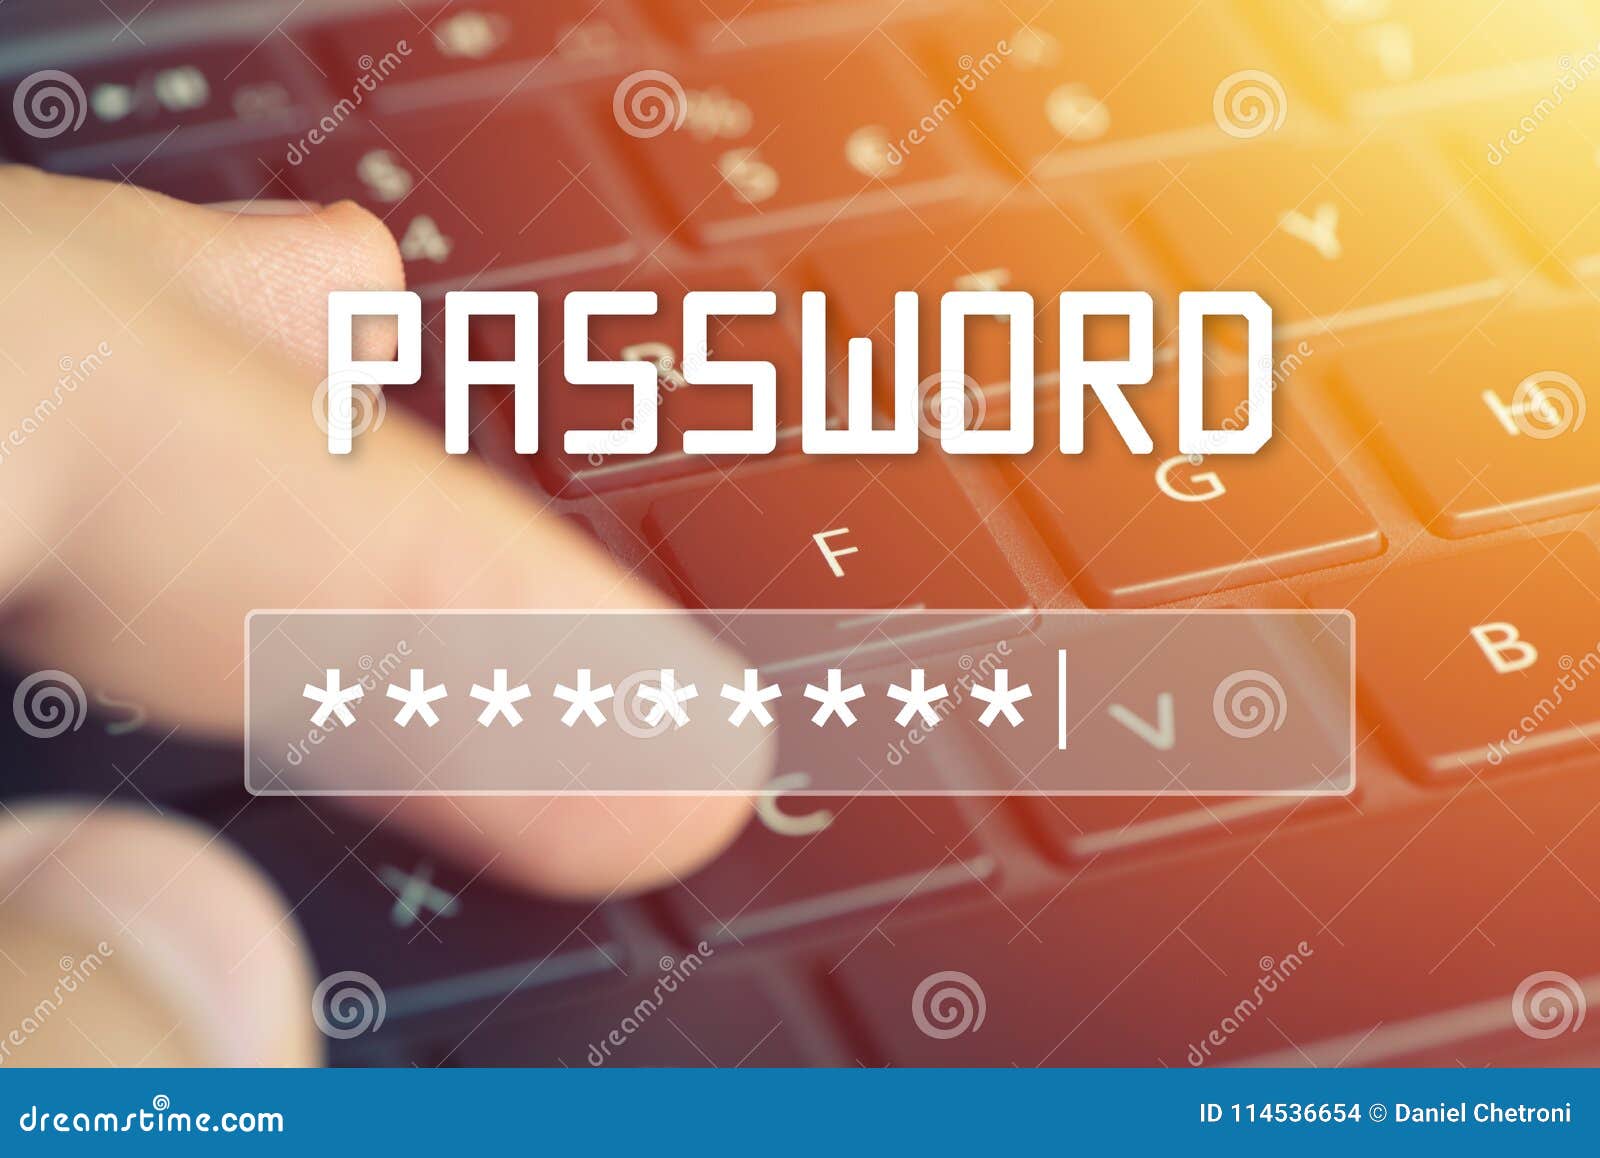 password input on blurred background screen. password protection against hackers